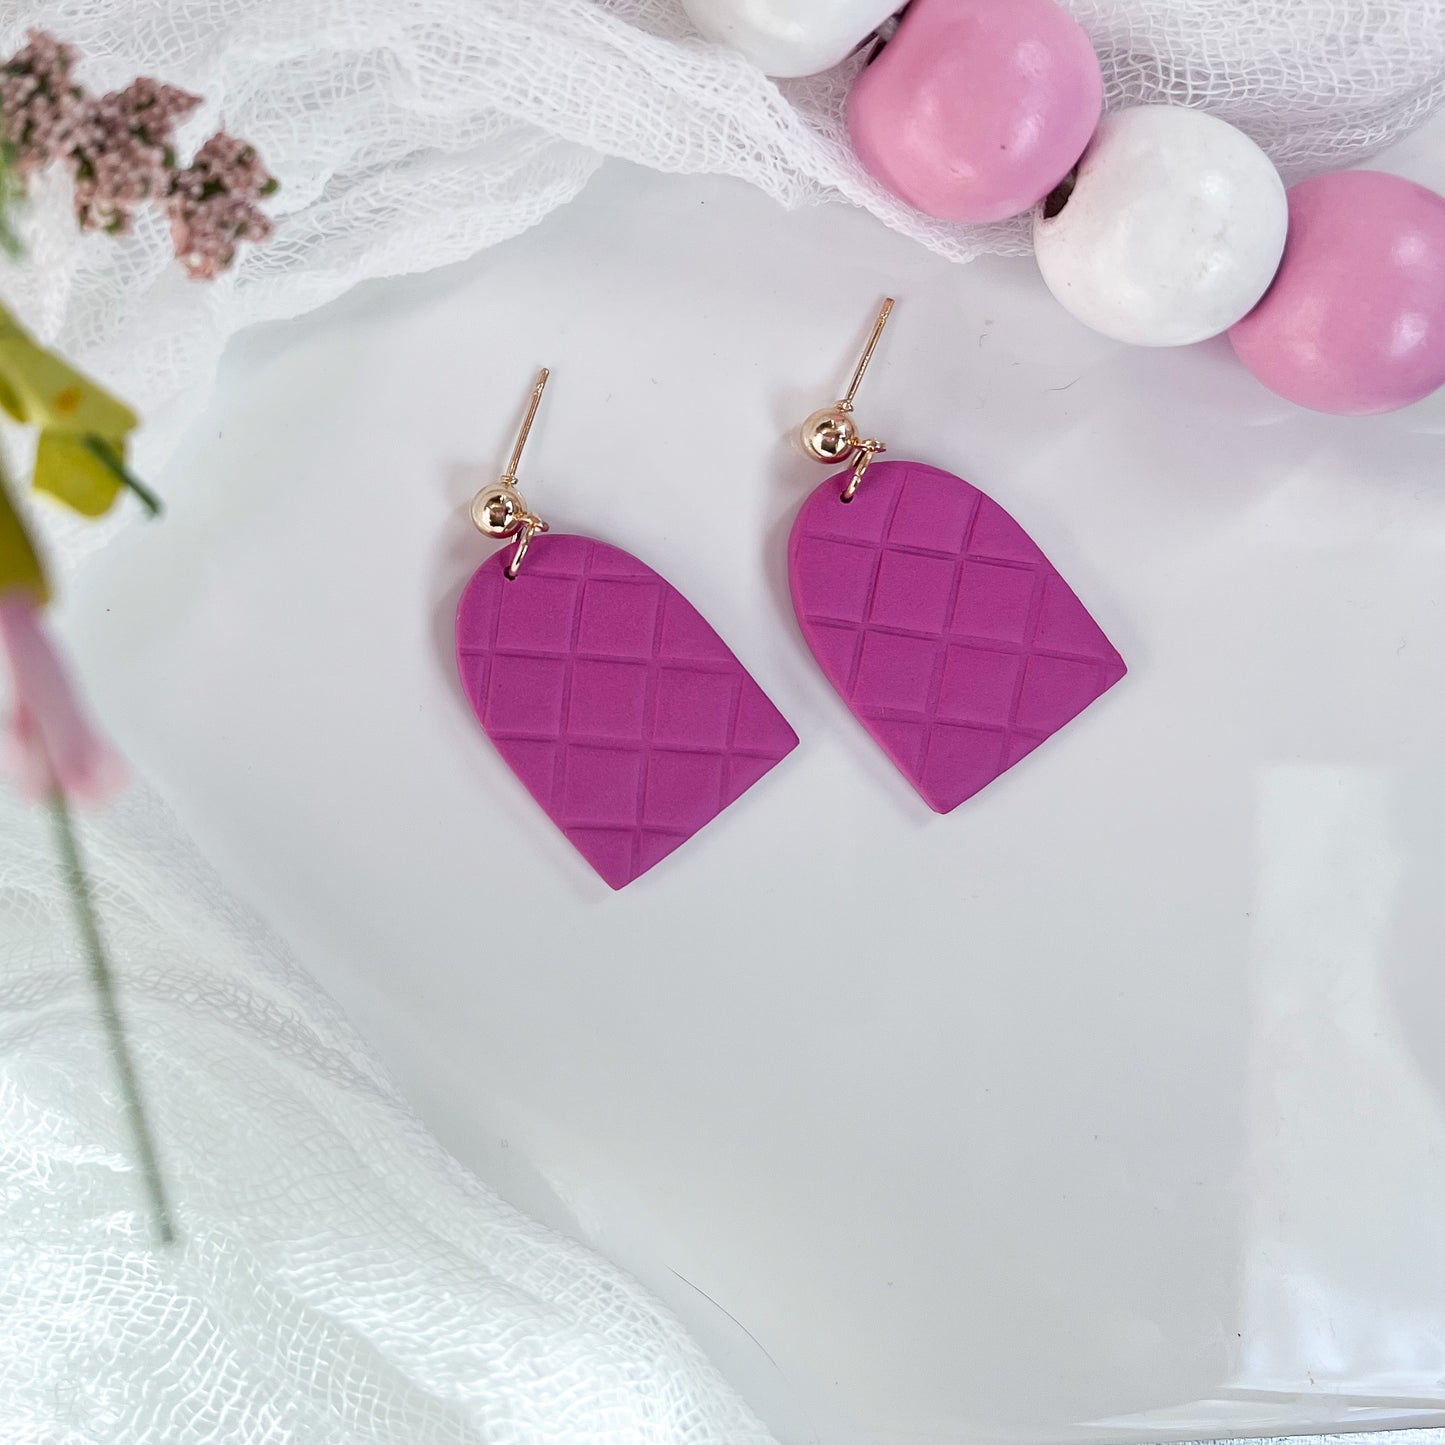 Evelyn quilted dangle earrings in dark pink